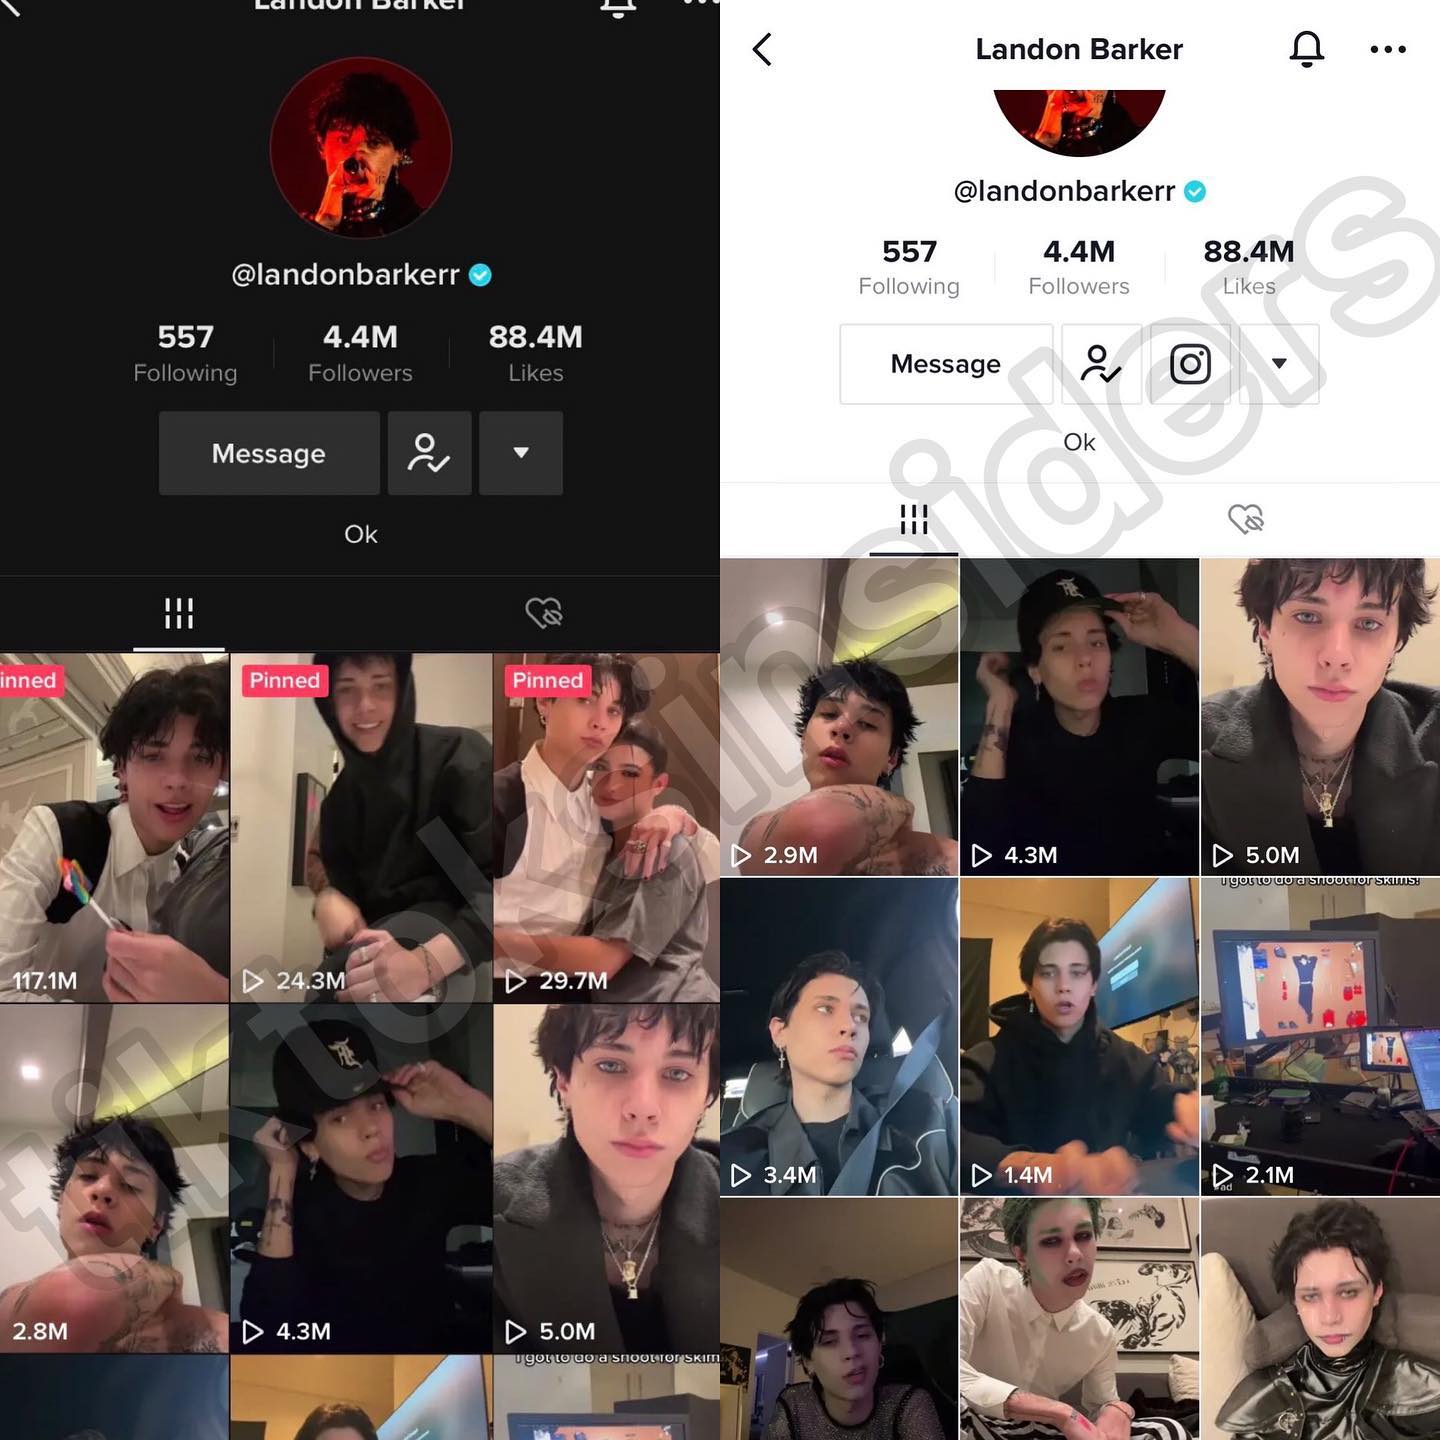 Landon Barker's TikTok handle before and after he unpinned videos with Charli D’Amelio